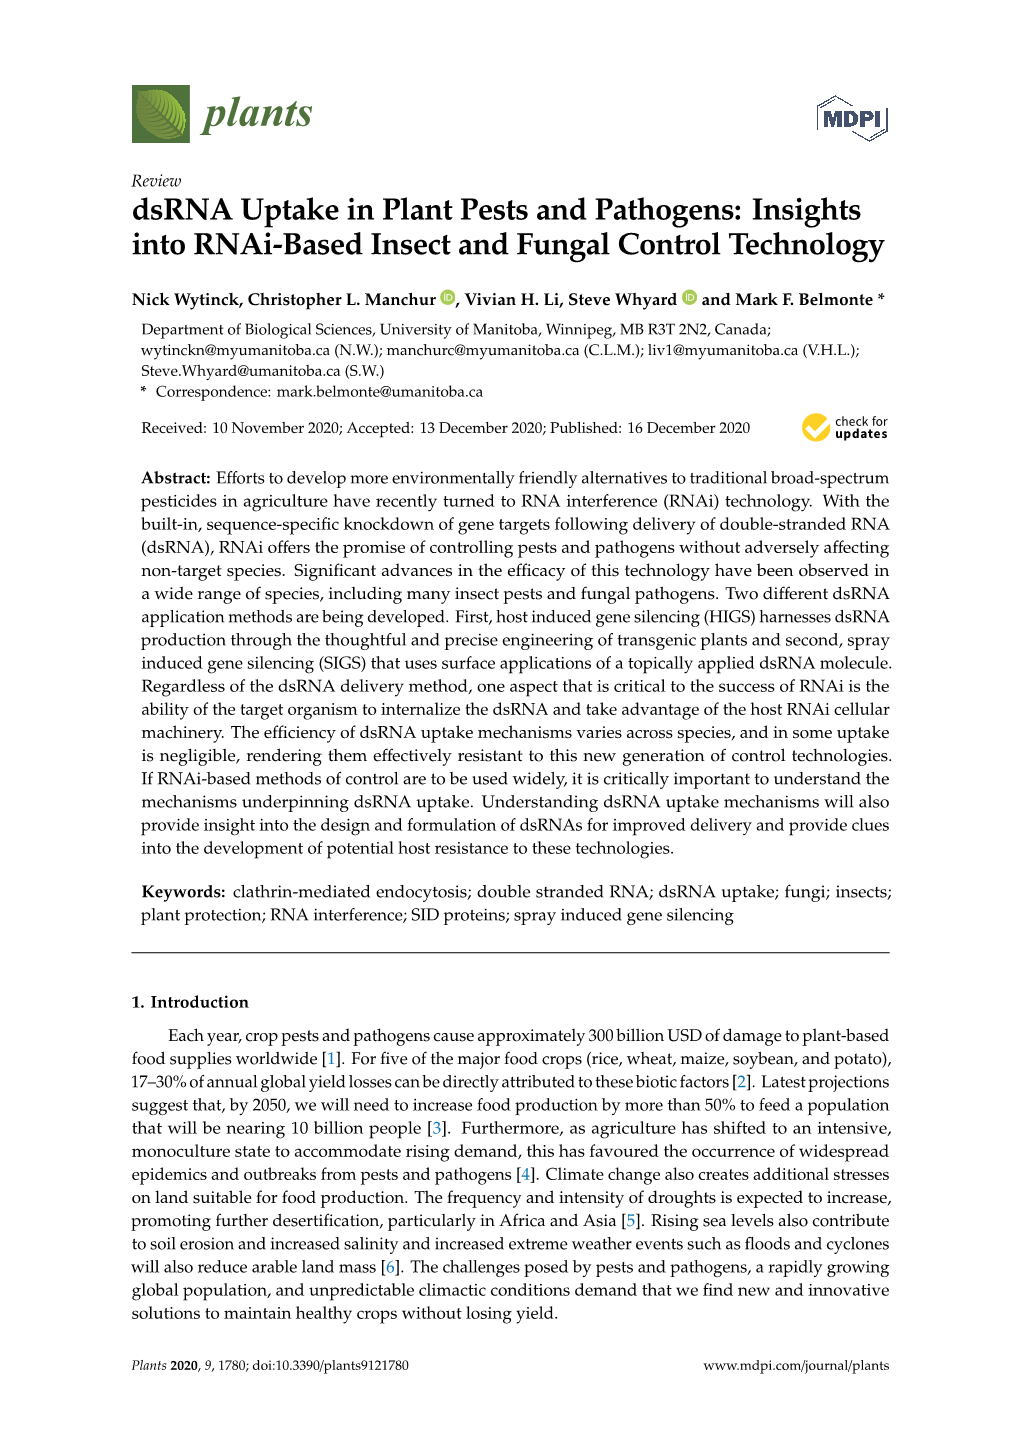 Insights Into Rnai-Based Insect and Fungal Control Technology